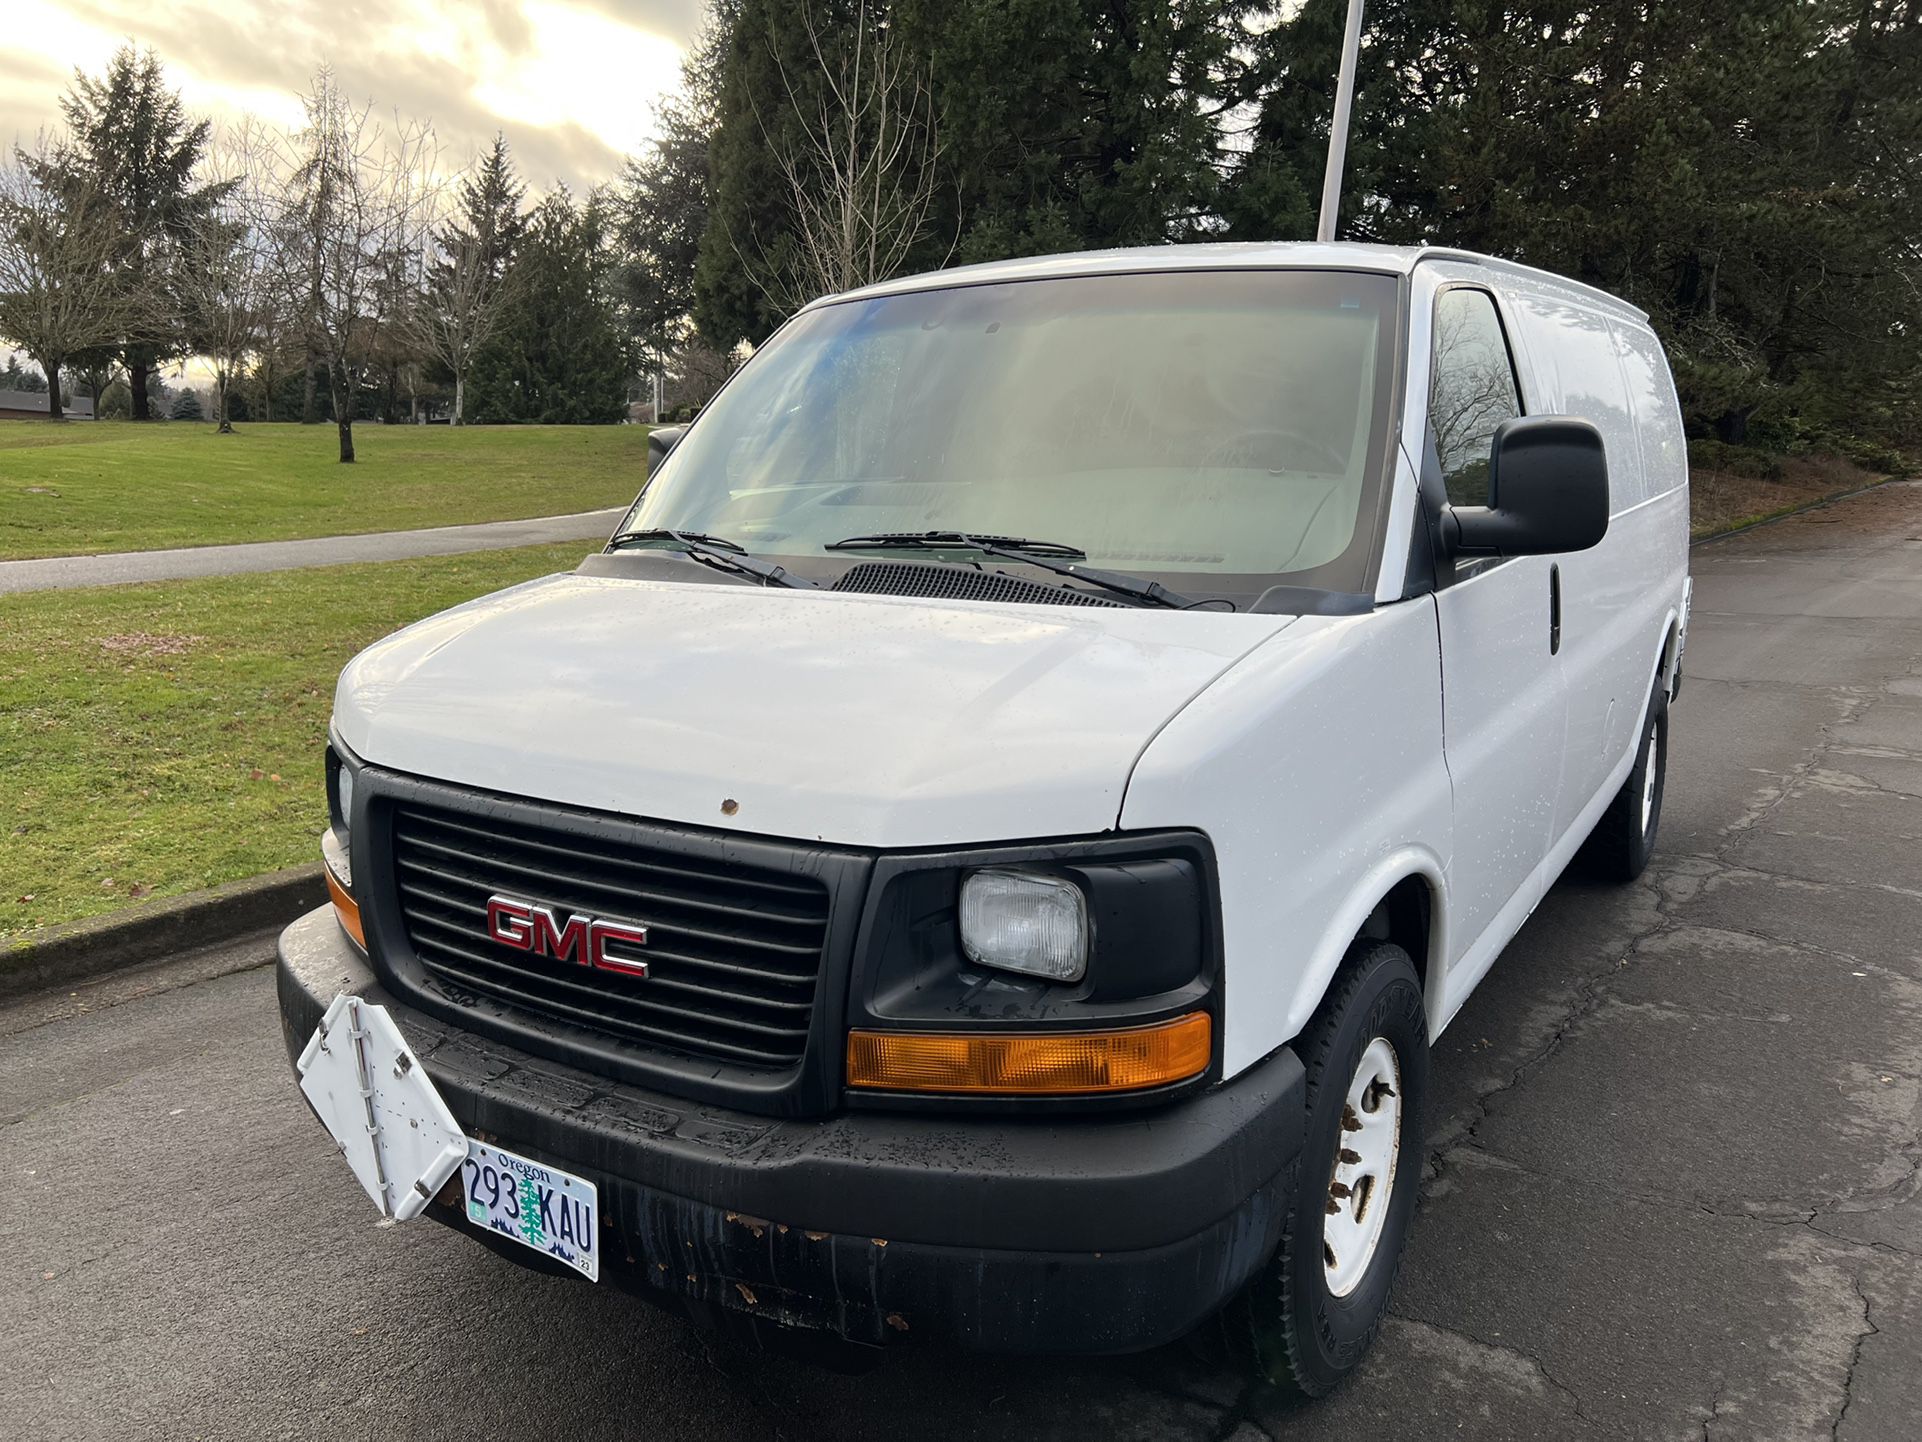 2012 GMC Savana for Sale in Dundee, OR - OfferUp